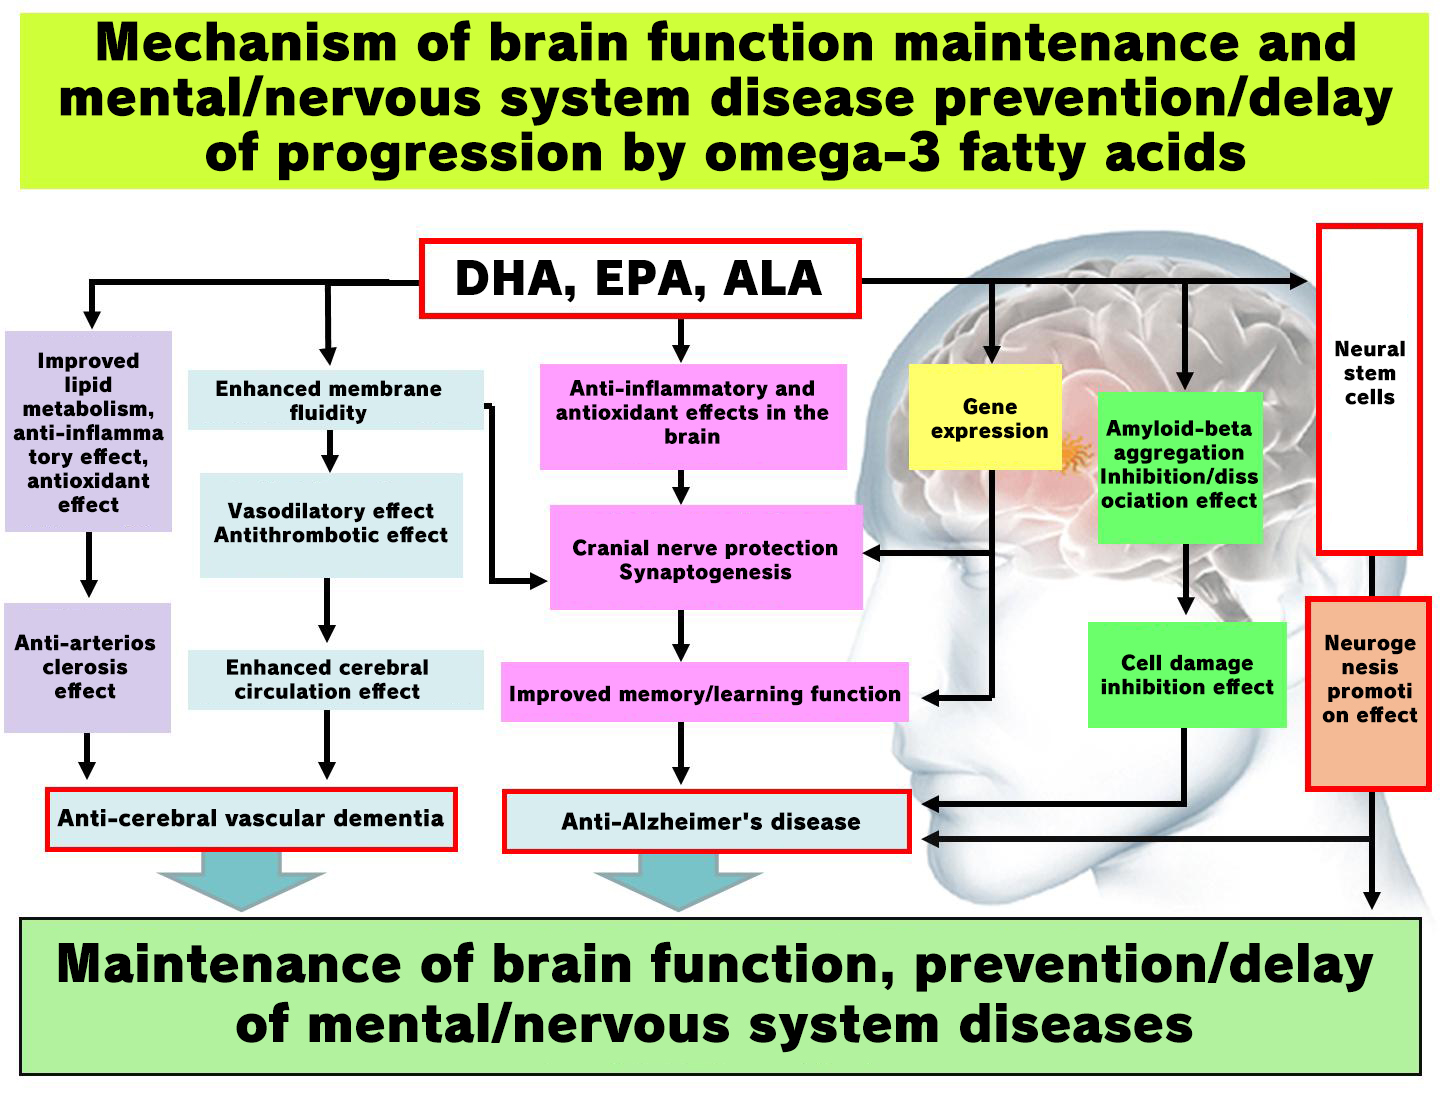 Effects of Perilla Oil on Brain Function—Will the Results of Human Intervention Tests Show the Possibility of Perilla Oil Becoming “Fish Oil (DHA/EPA) From the Field?”